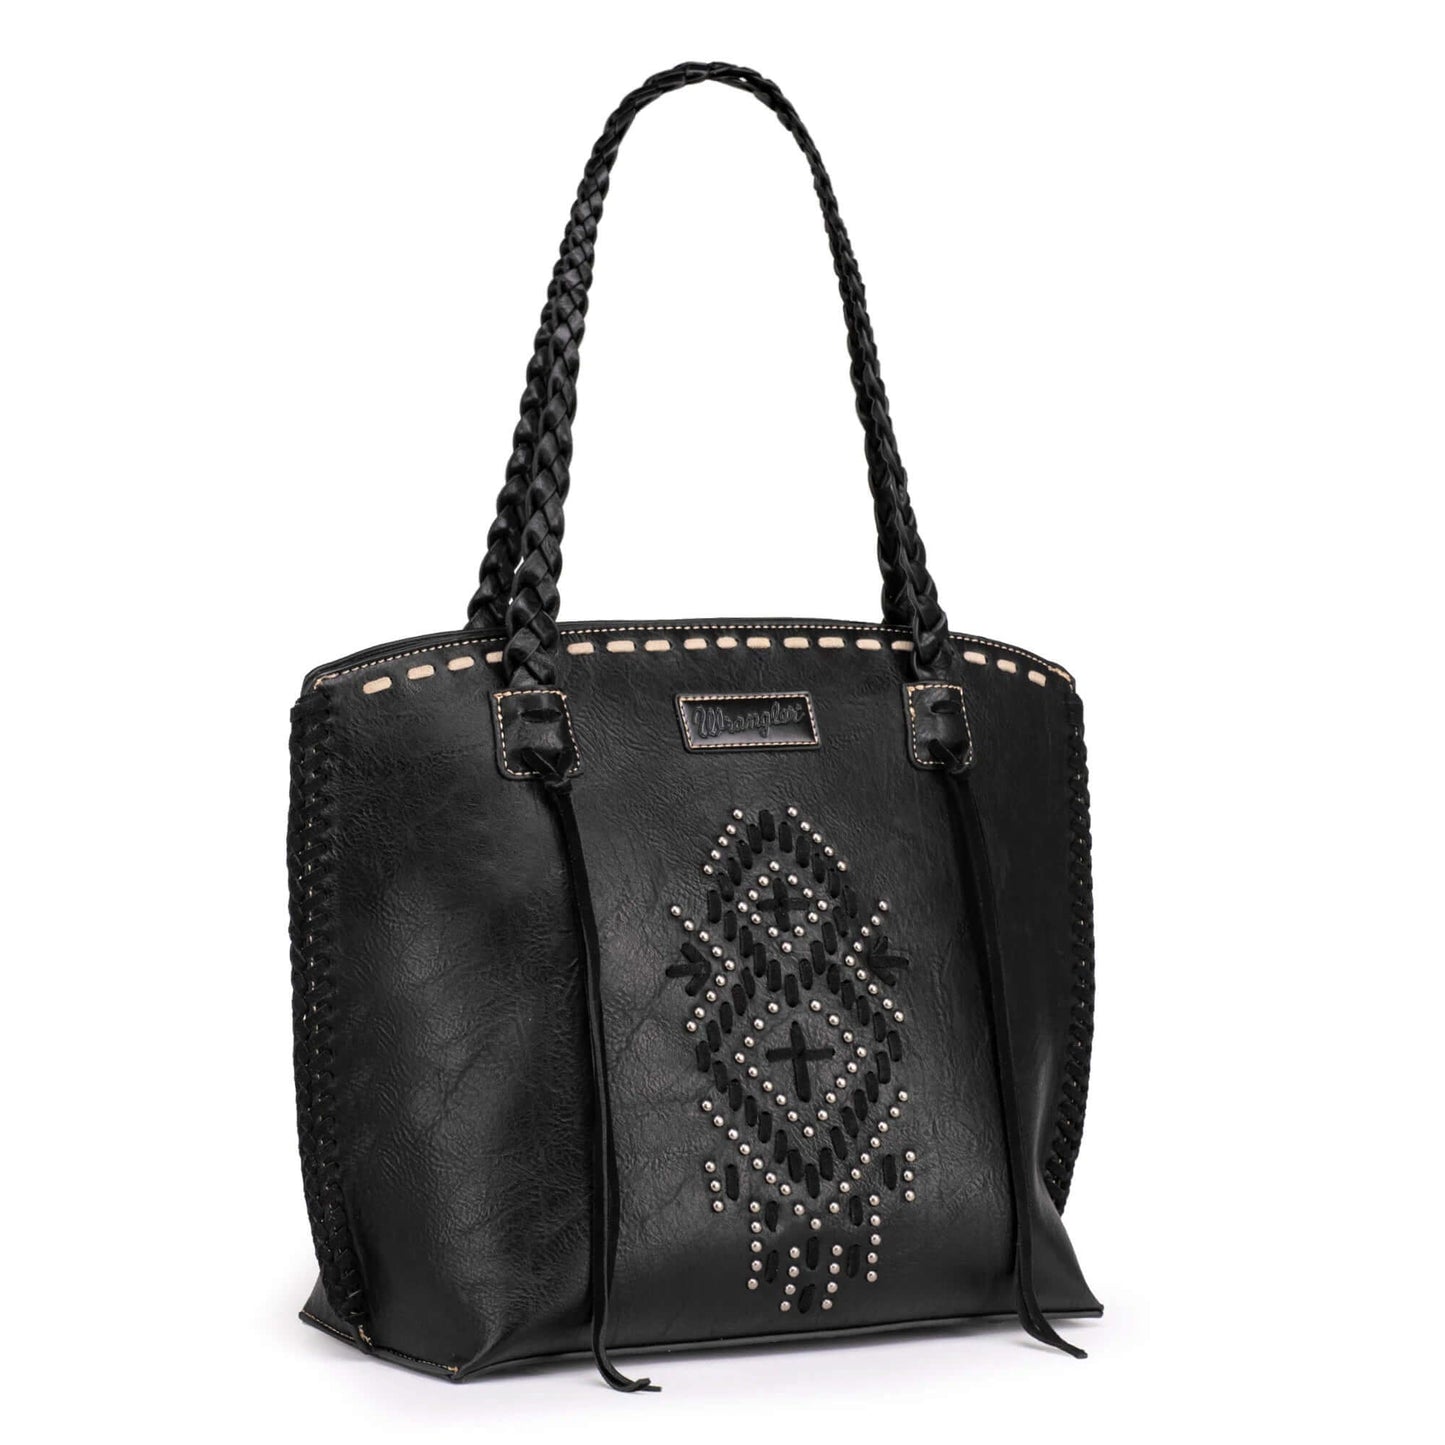 Wrangler Tribal Purse Whipstitch Braided Strap Tote Bag Pick Color